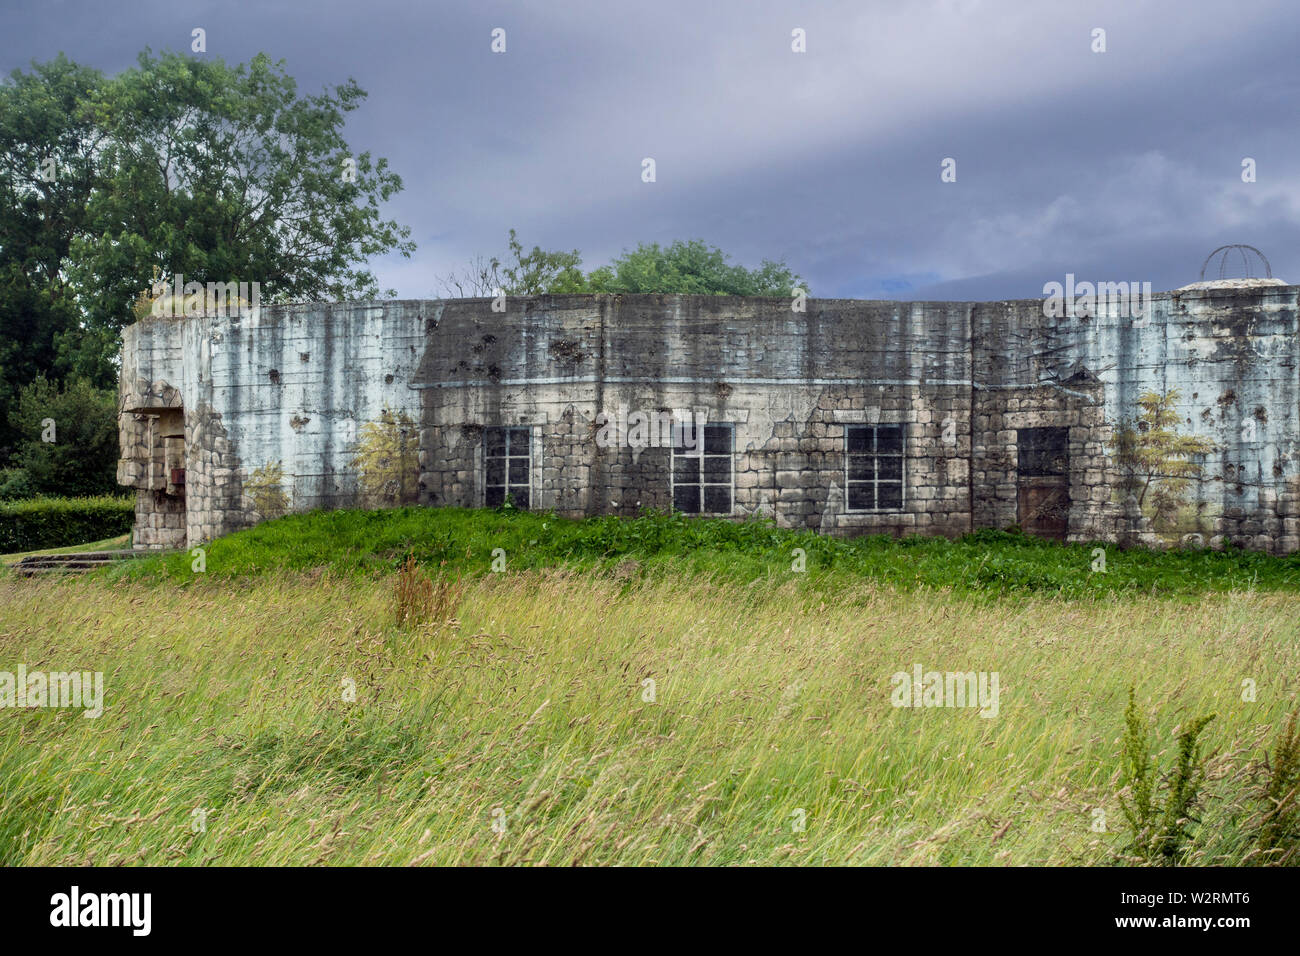 Camouflage painting showing ruined building on rear of gun casemate / artillery bunker of WWII Batterie d'Azeville Battery, Normandy, France Stock Photo